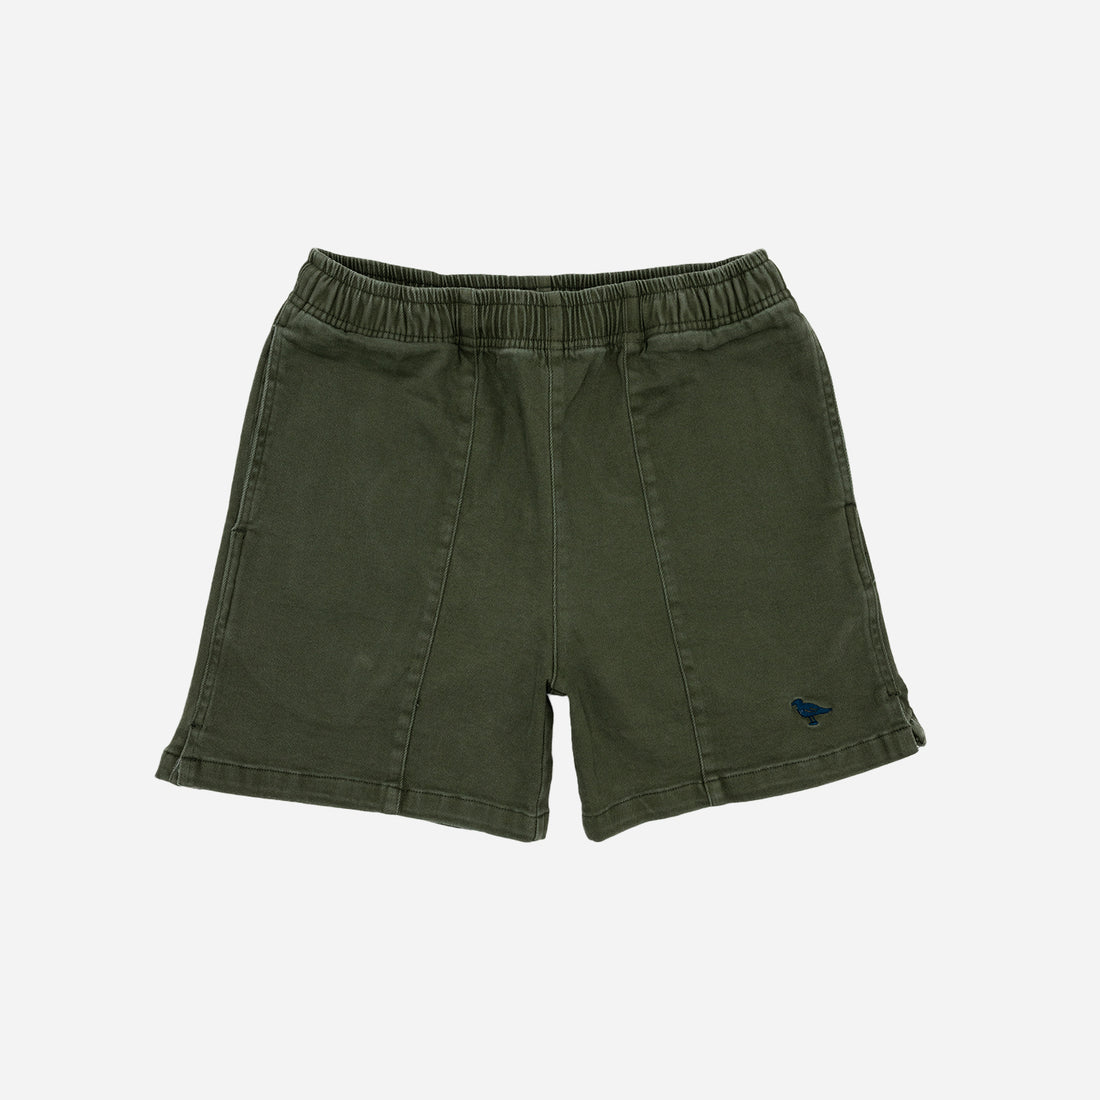 5 Inch Washed Gym Shorts in Olive Green – Just Mystic Brand